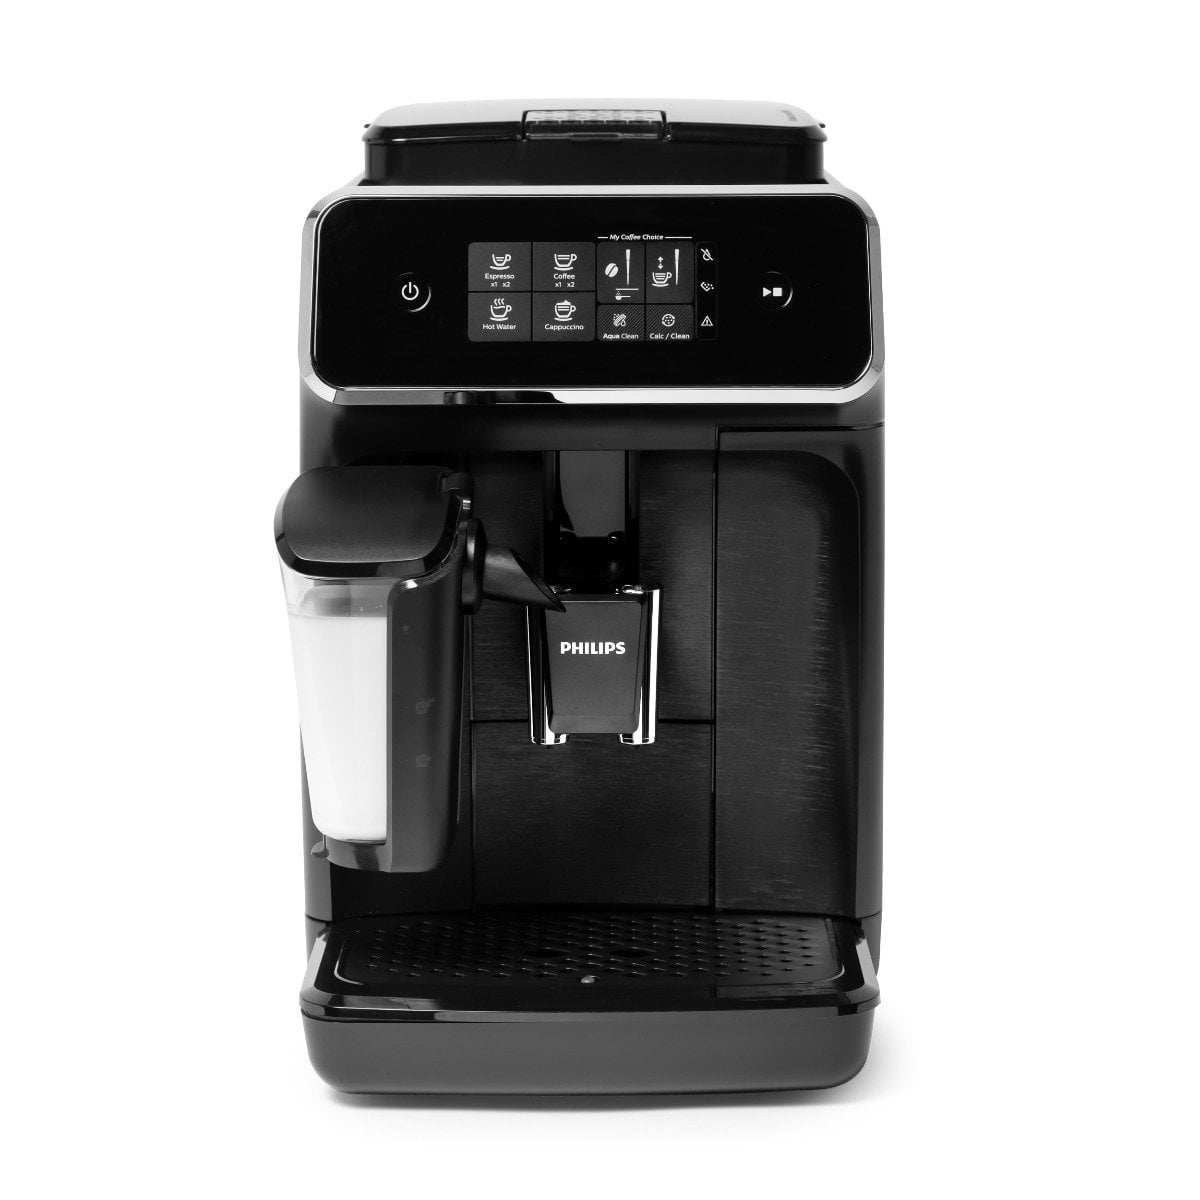 Philips 3200 Fully Automatic Espresso and Latte Machine